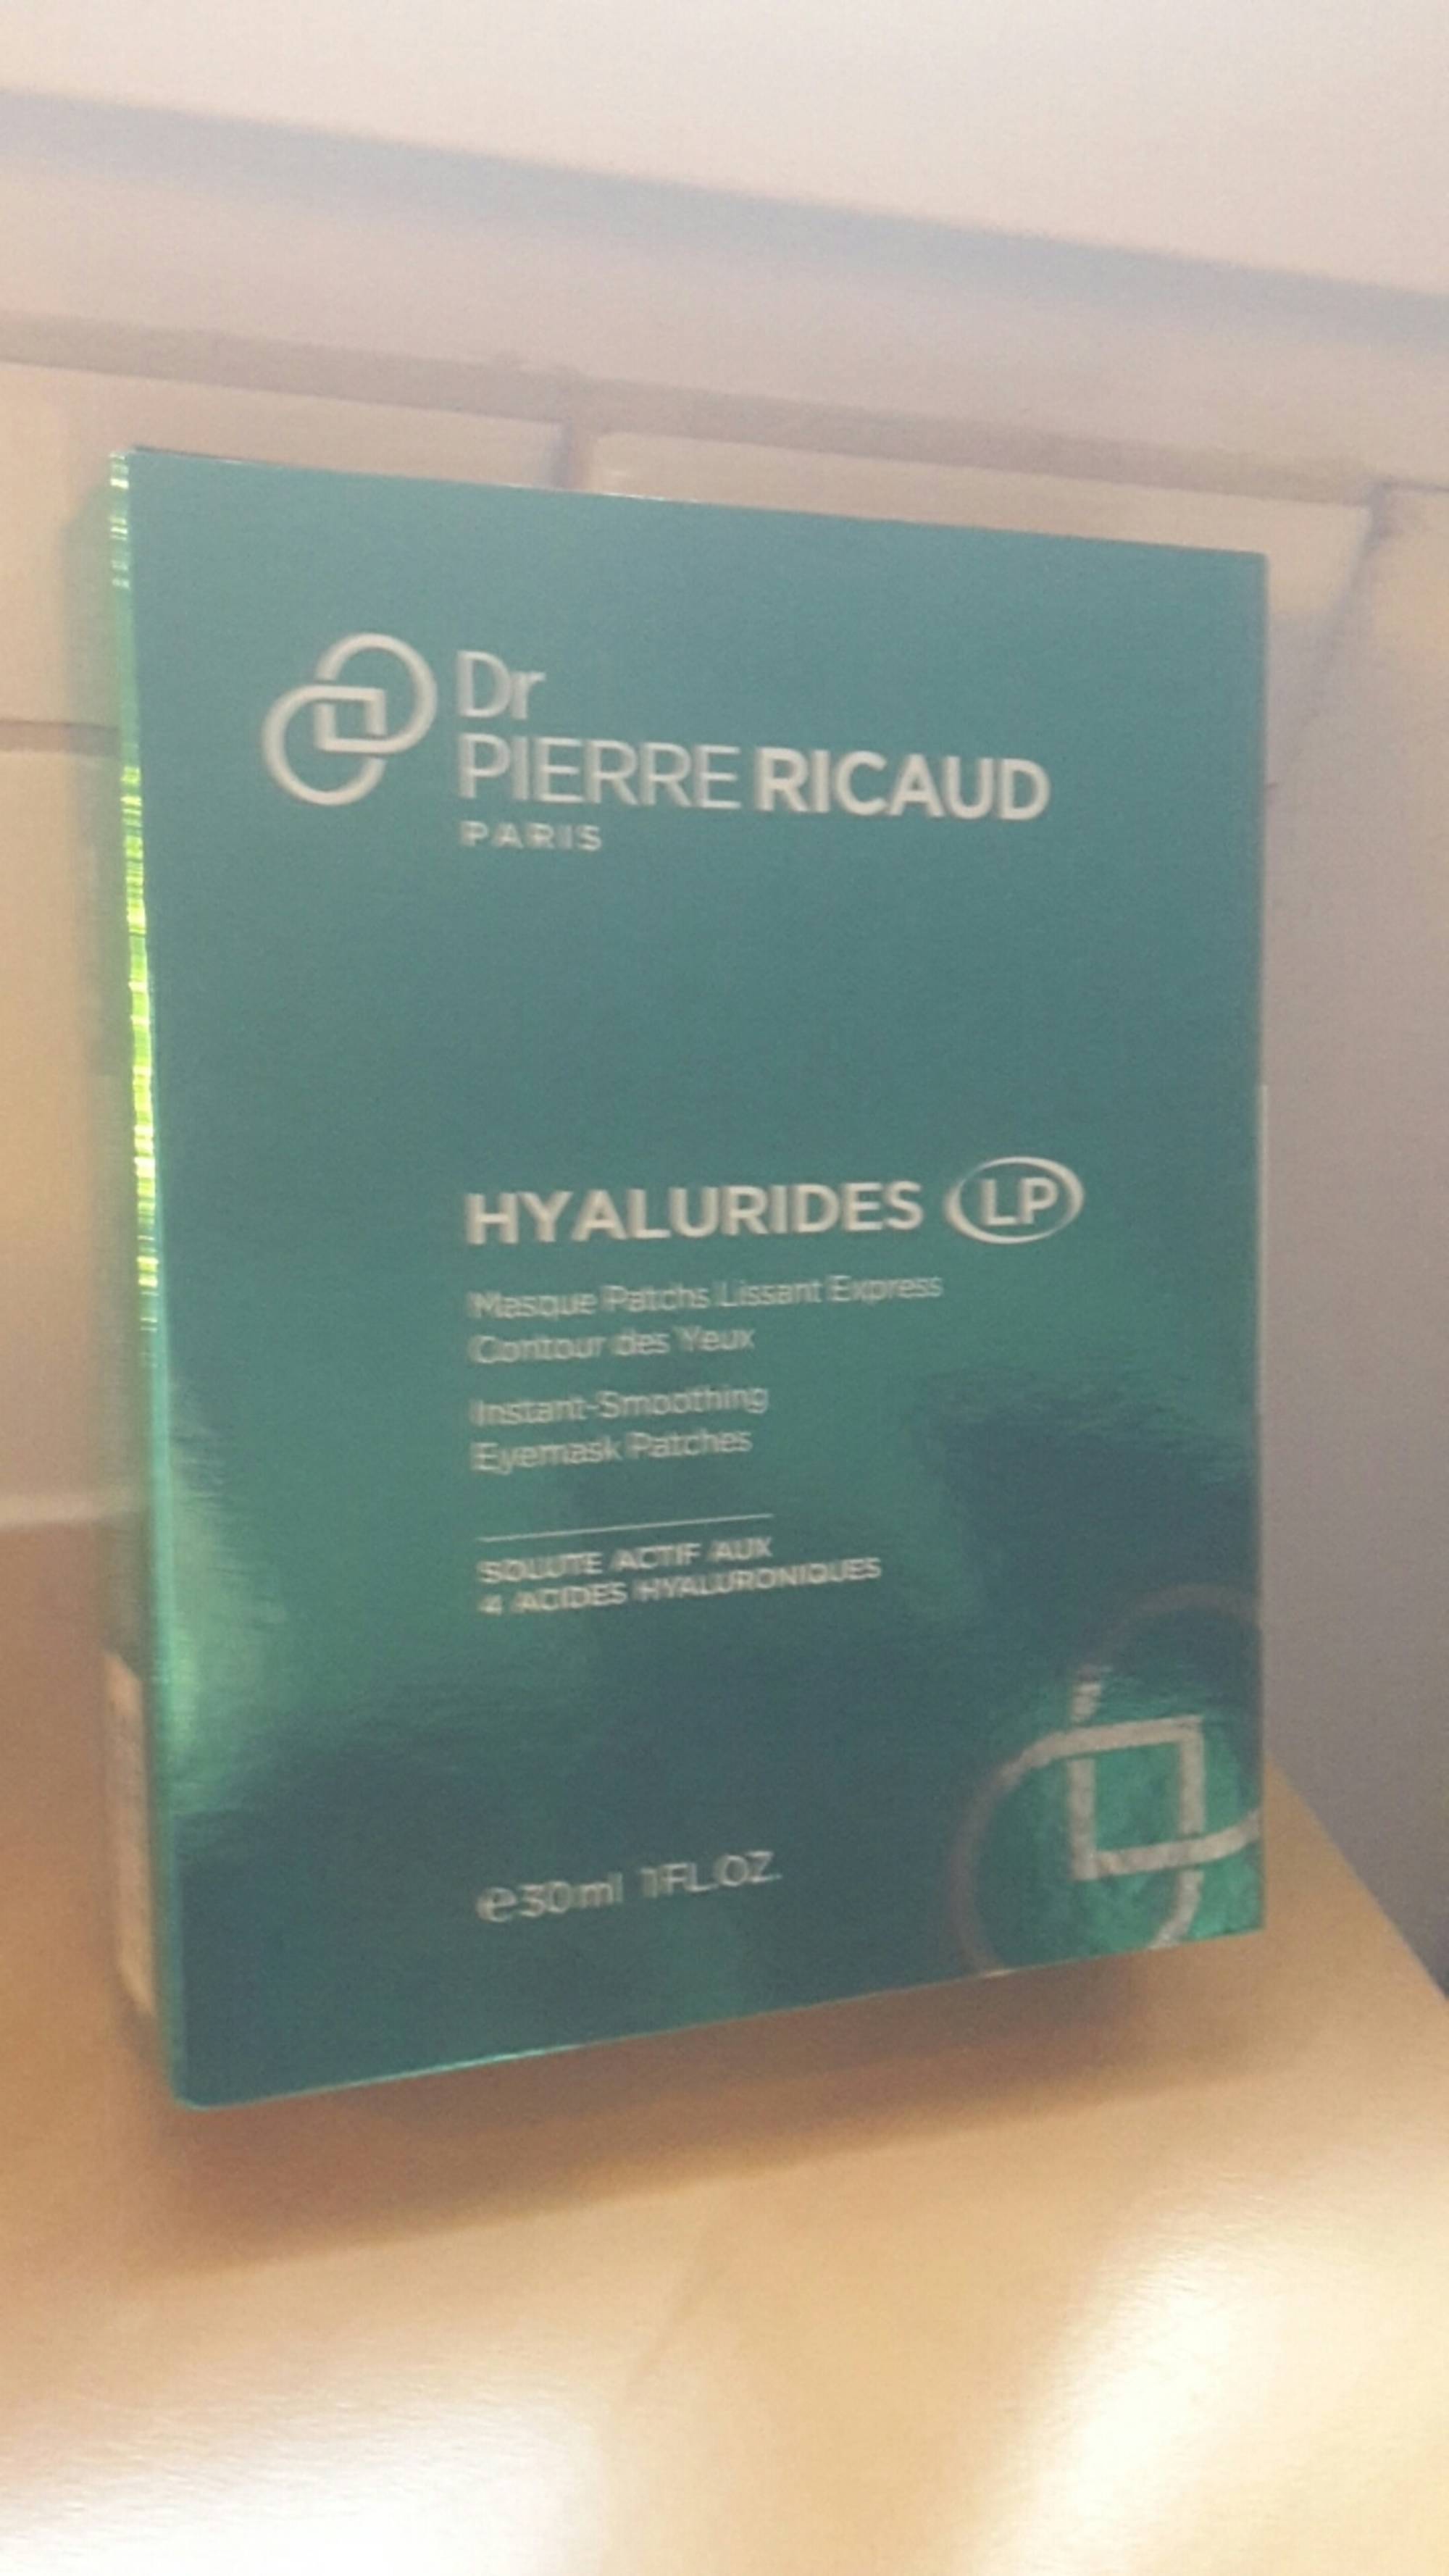 DR PIERRE RICAUD - Hyalurides lp - Masque patchs lissant express